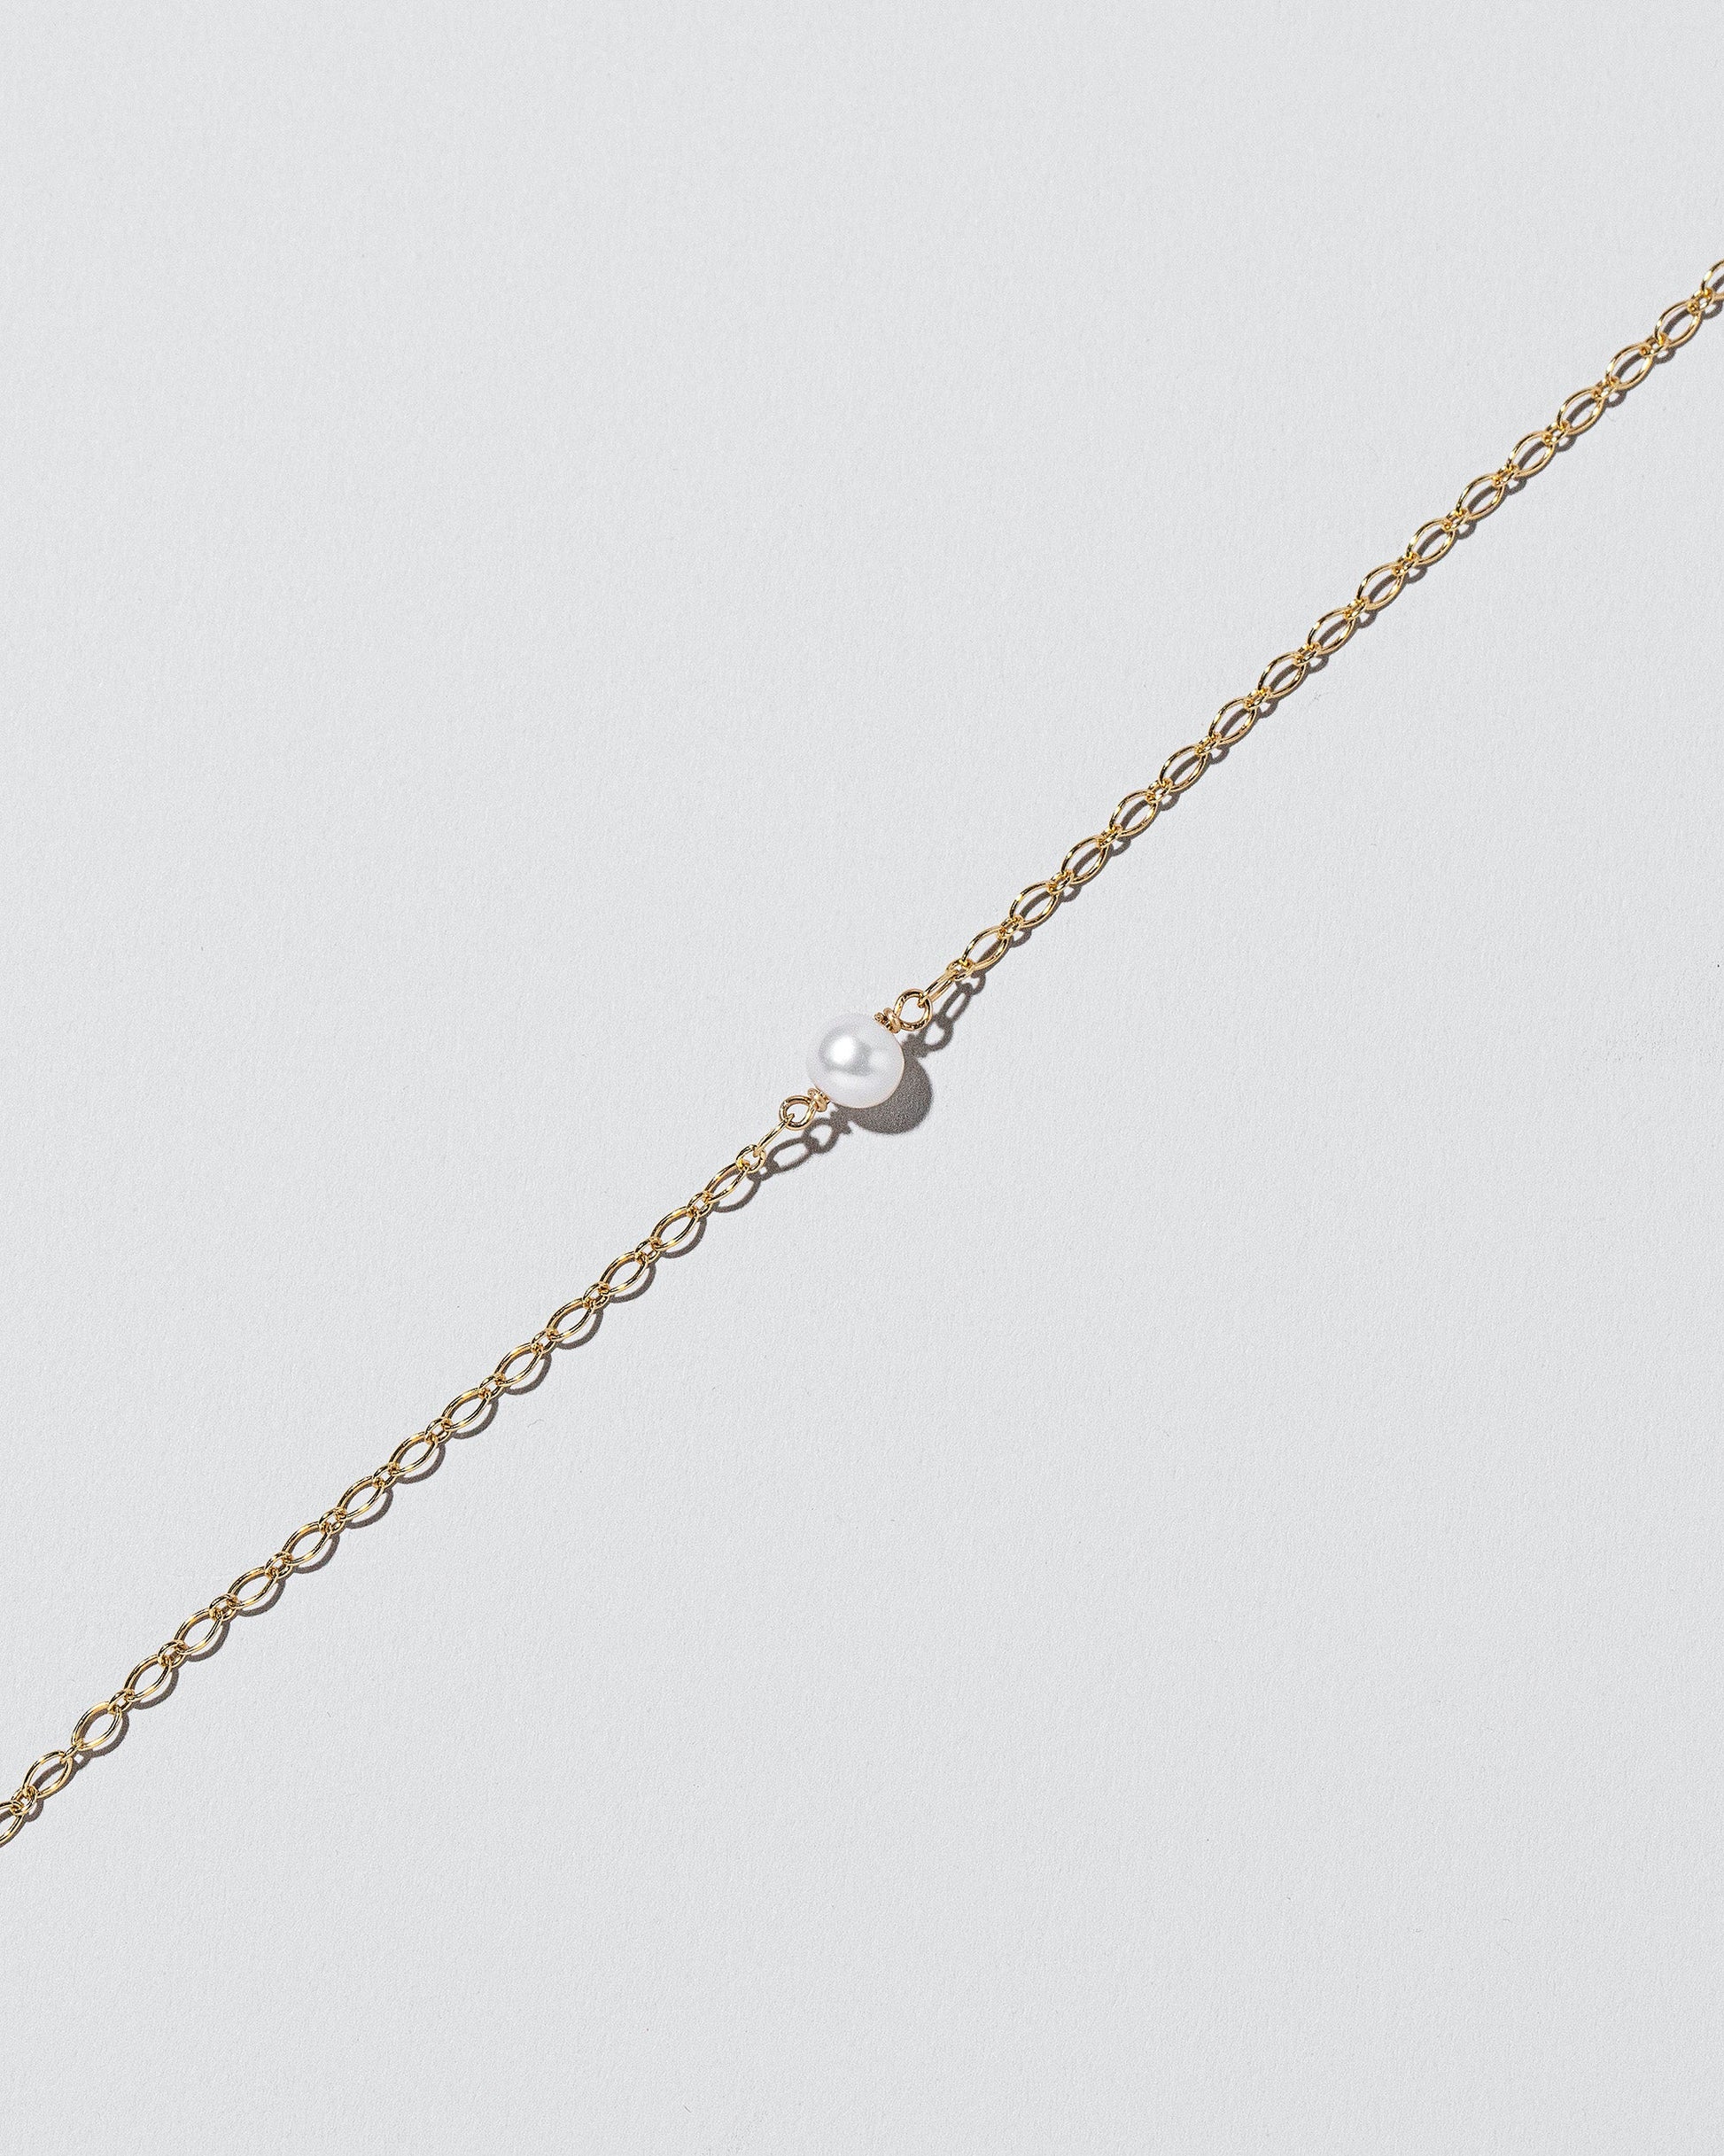 Closeup details of the One Pearl Station Bracelet Open Oval Chain on light color background.